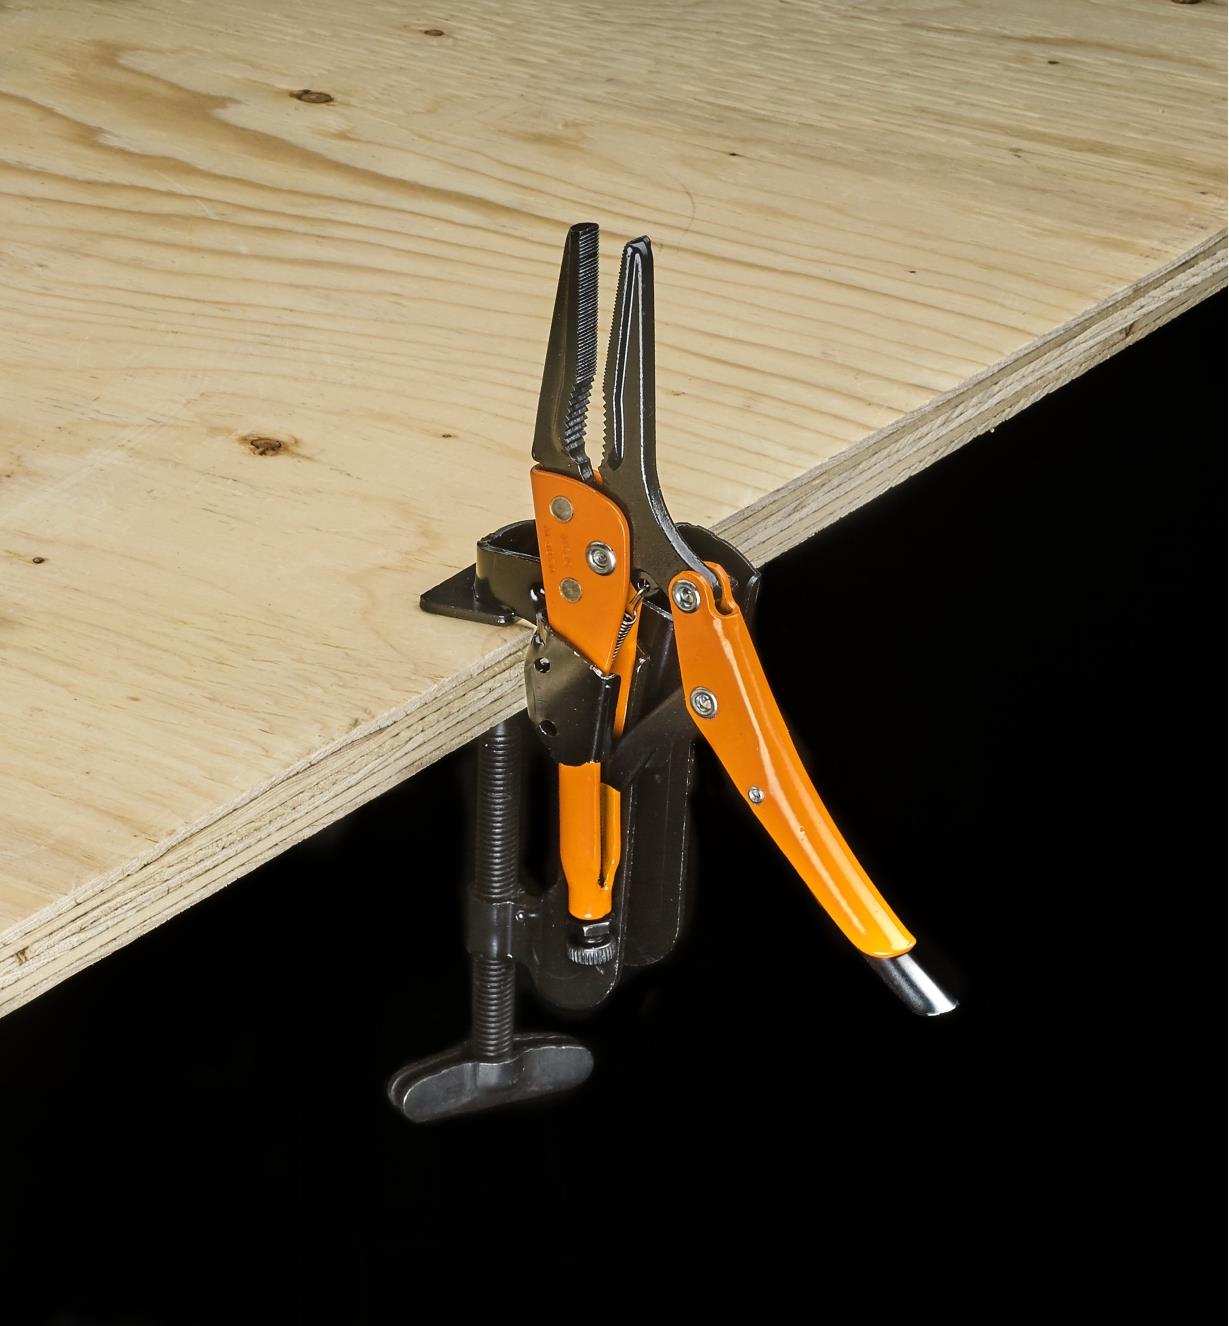 Grip-On long-jaw locking pliers in a job-site holder on the edge of a plywood sheet for use as a vise